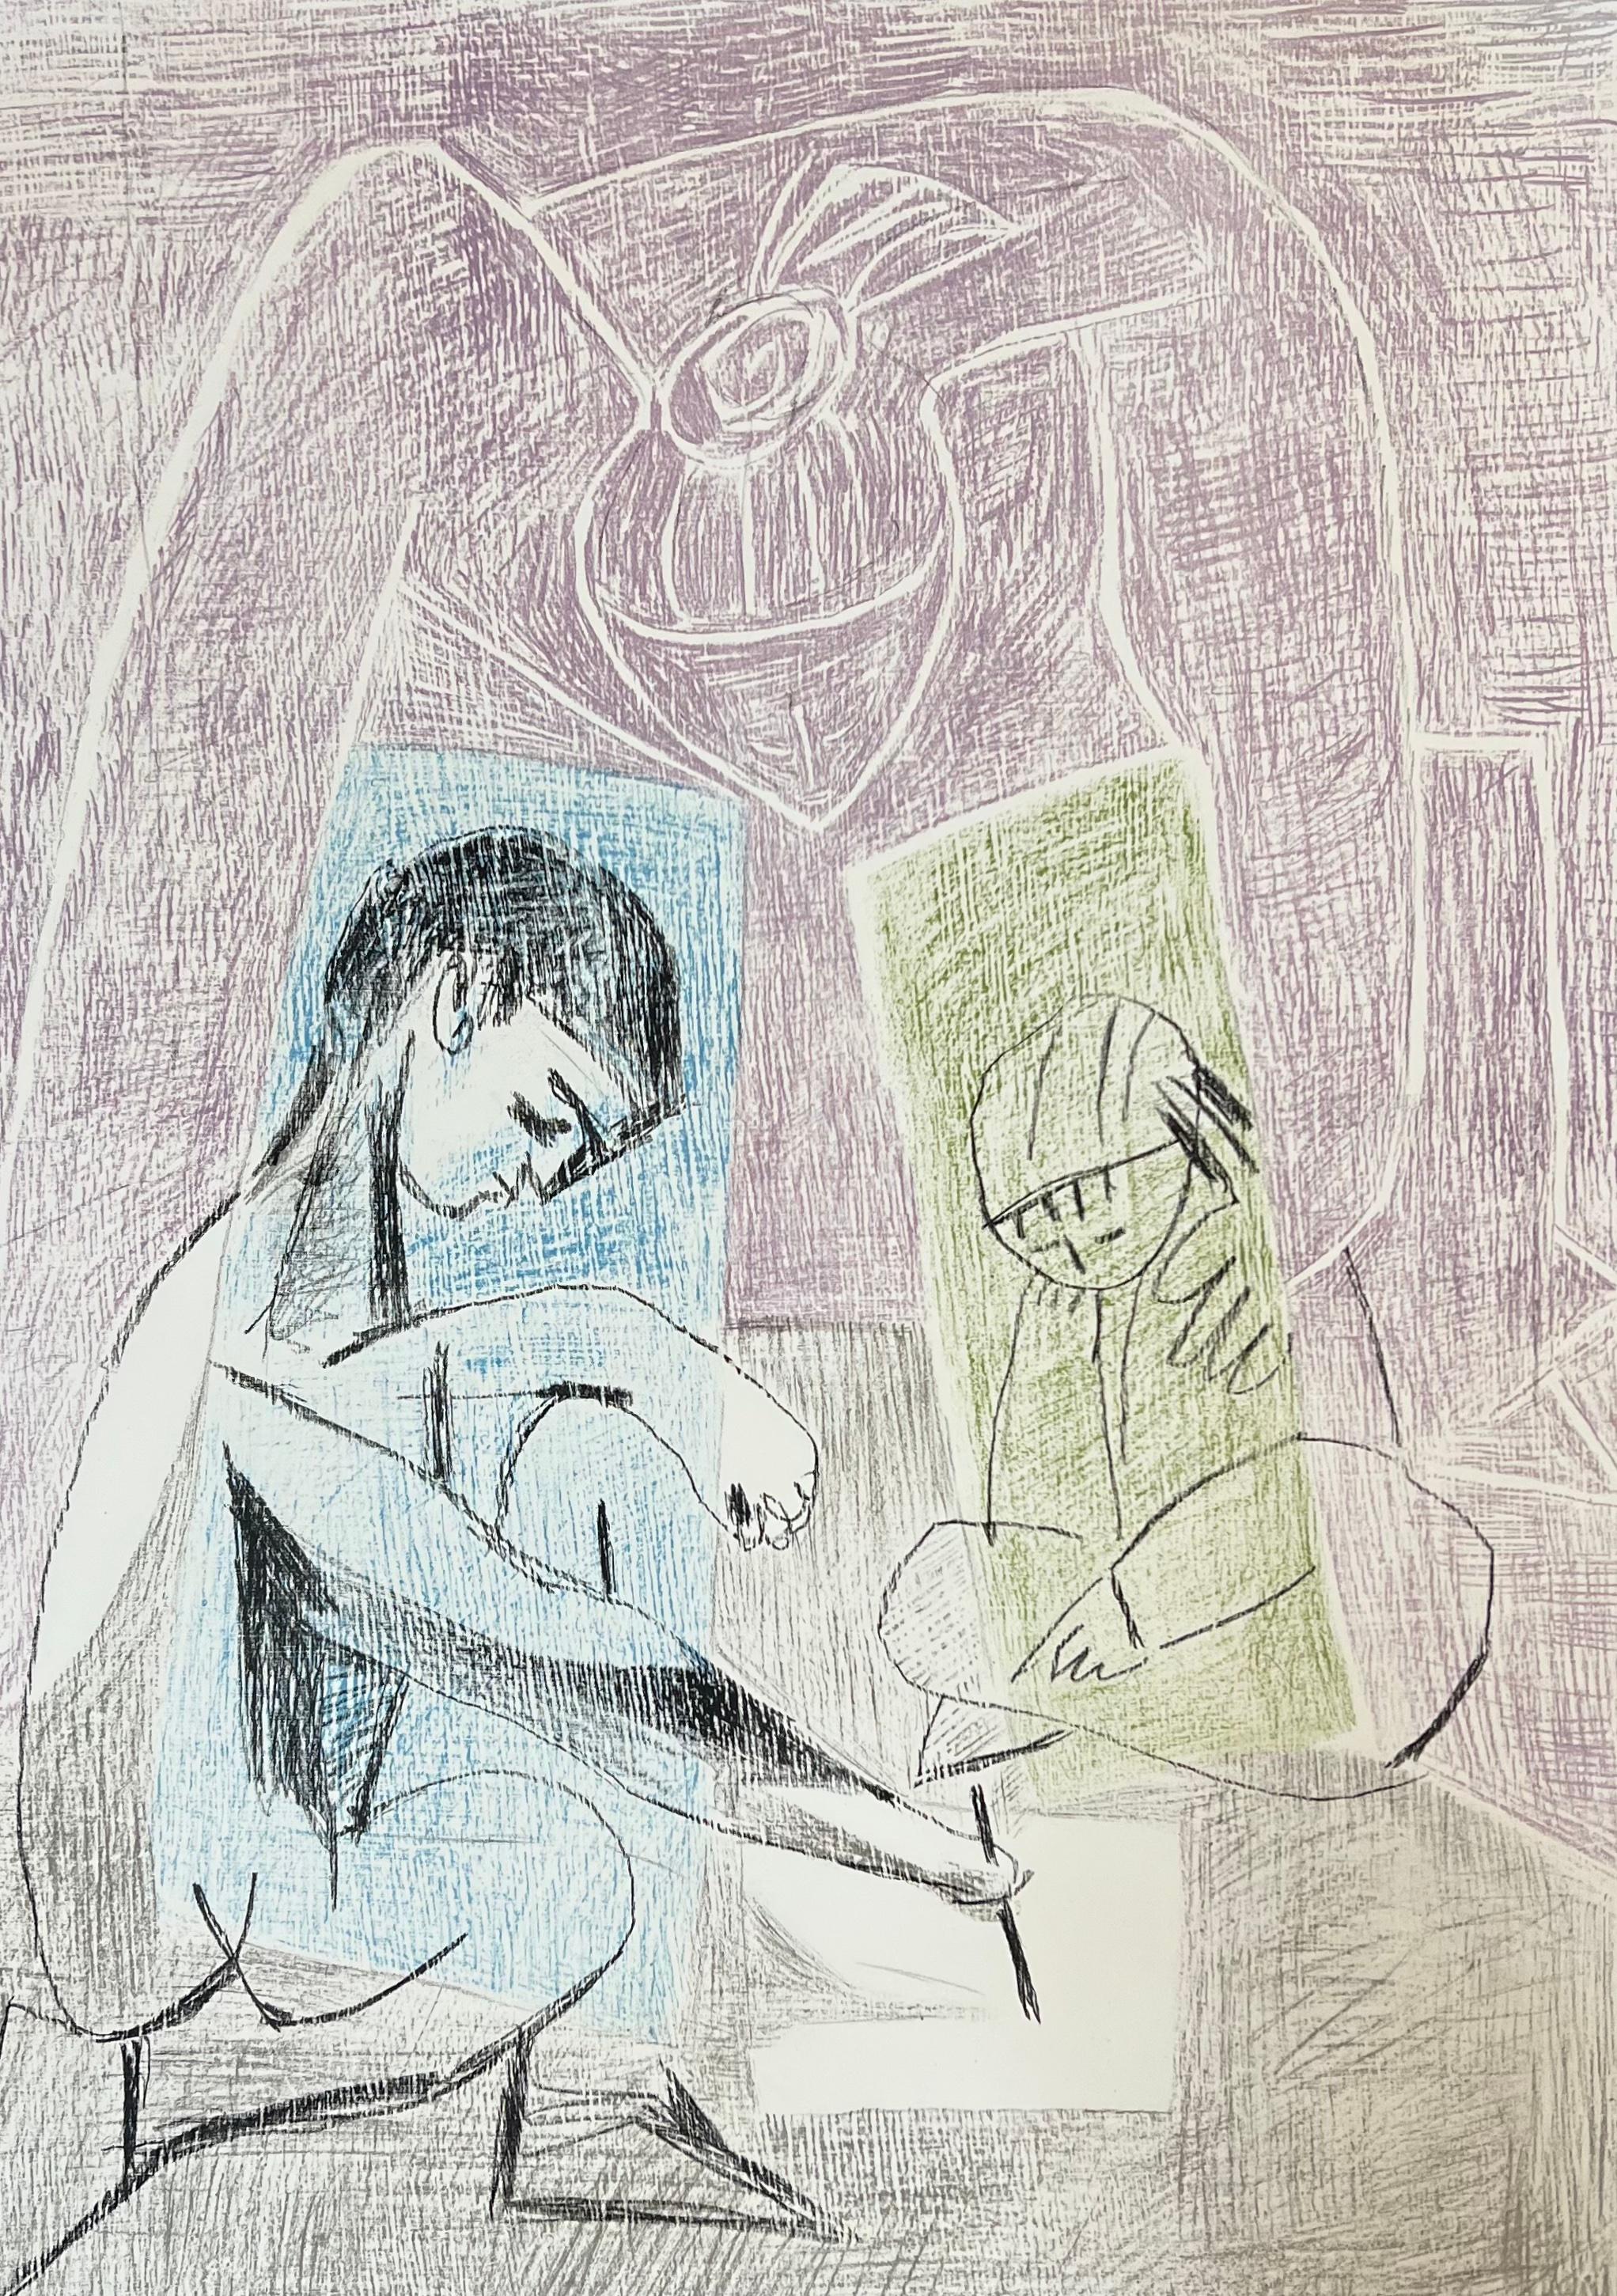 Pablo Picasso
Le Petit Dessinateur (The Little Artist), 1956
Lithograph in five colors
Hand signed in pencil and numbered 6/50 from an edition of 50
Vallauris, May 18th, 1956
Referenced as #263 in Mourlot's ,